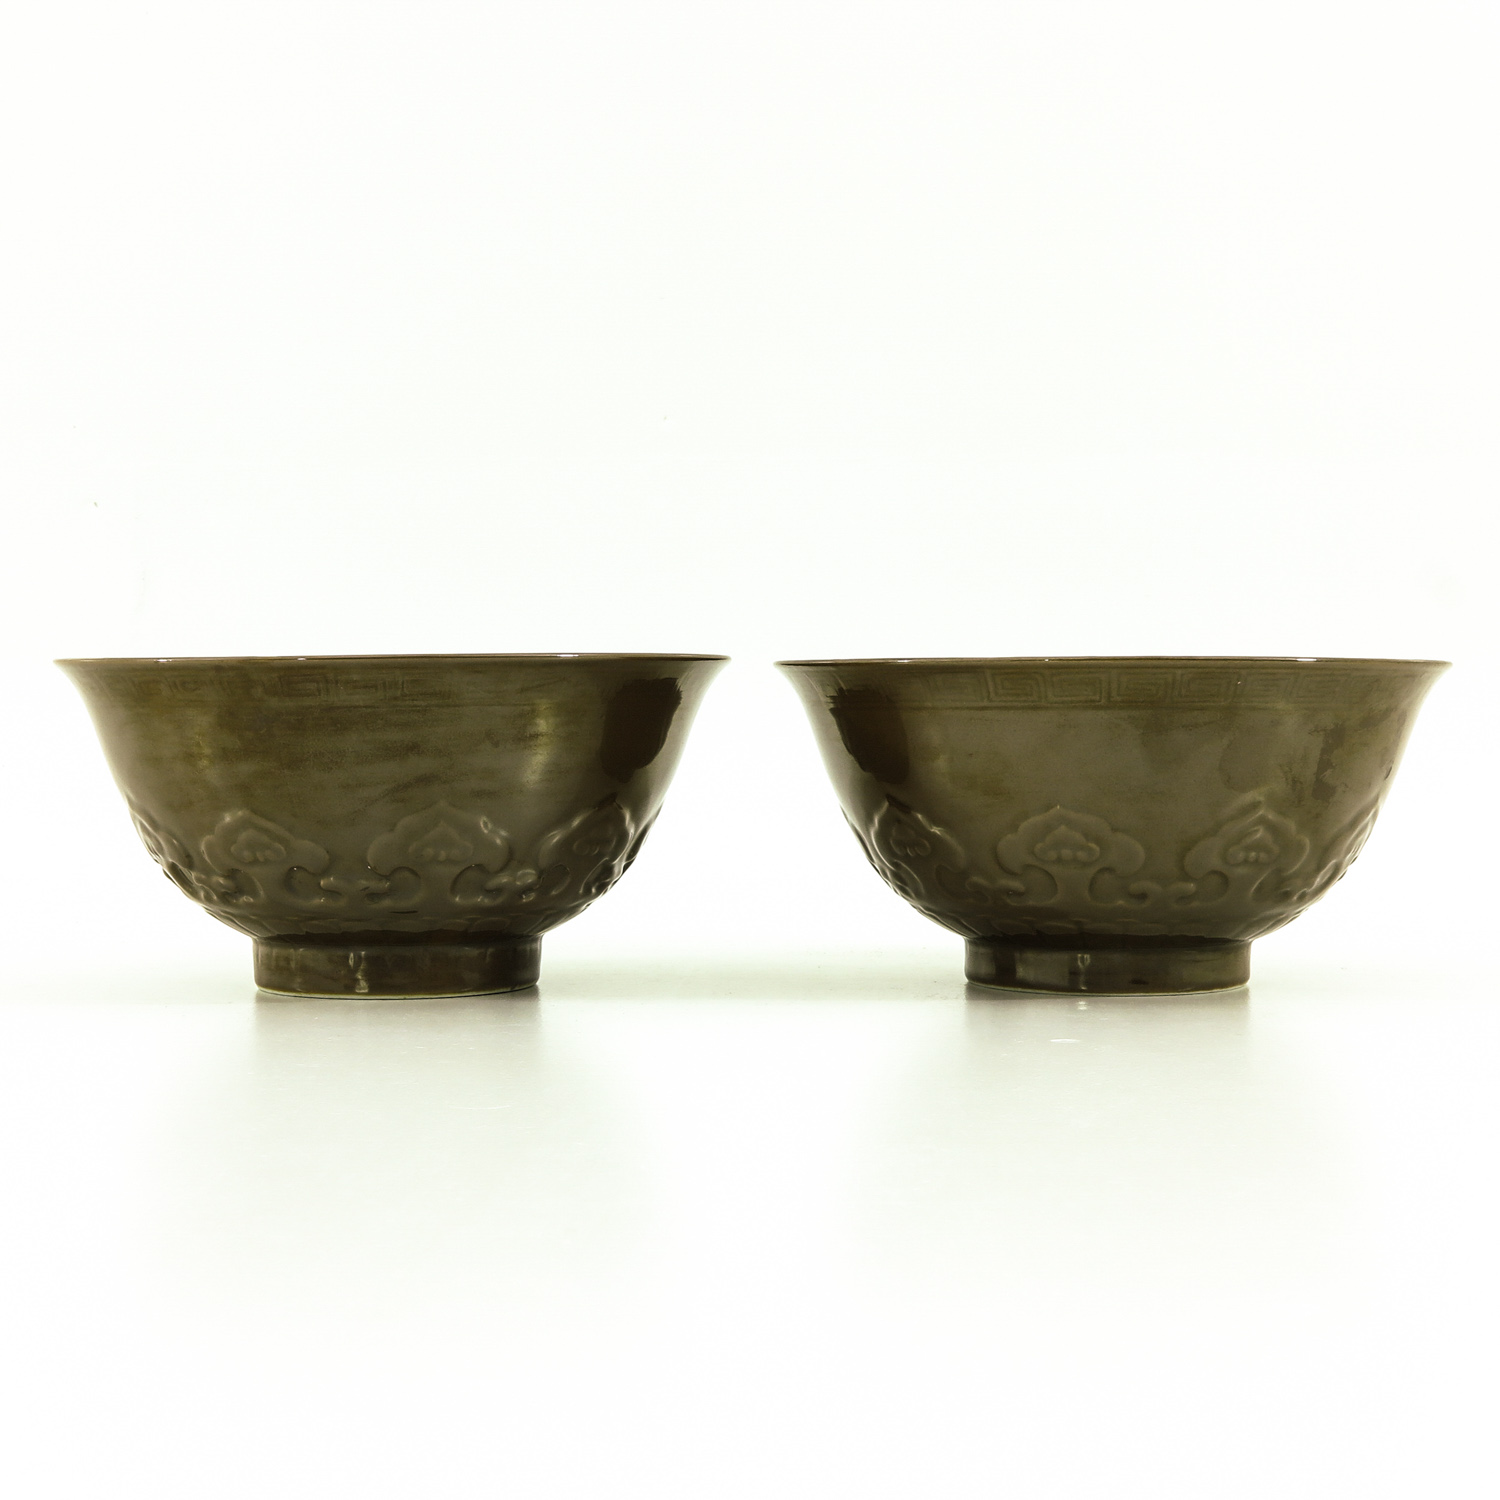 A Pair of Monochrome Brown Glaze Bowls - Image 2 of 10